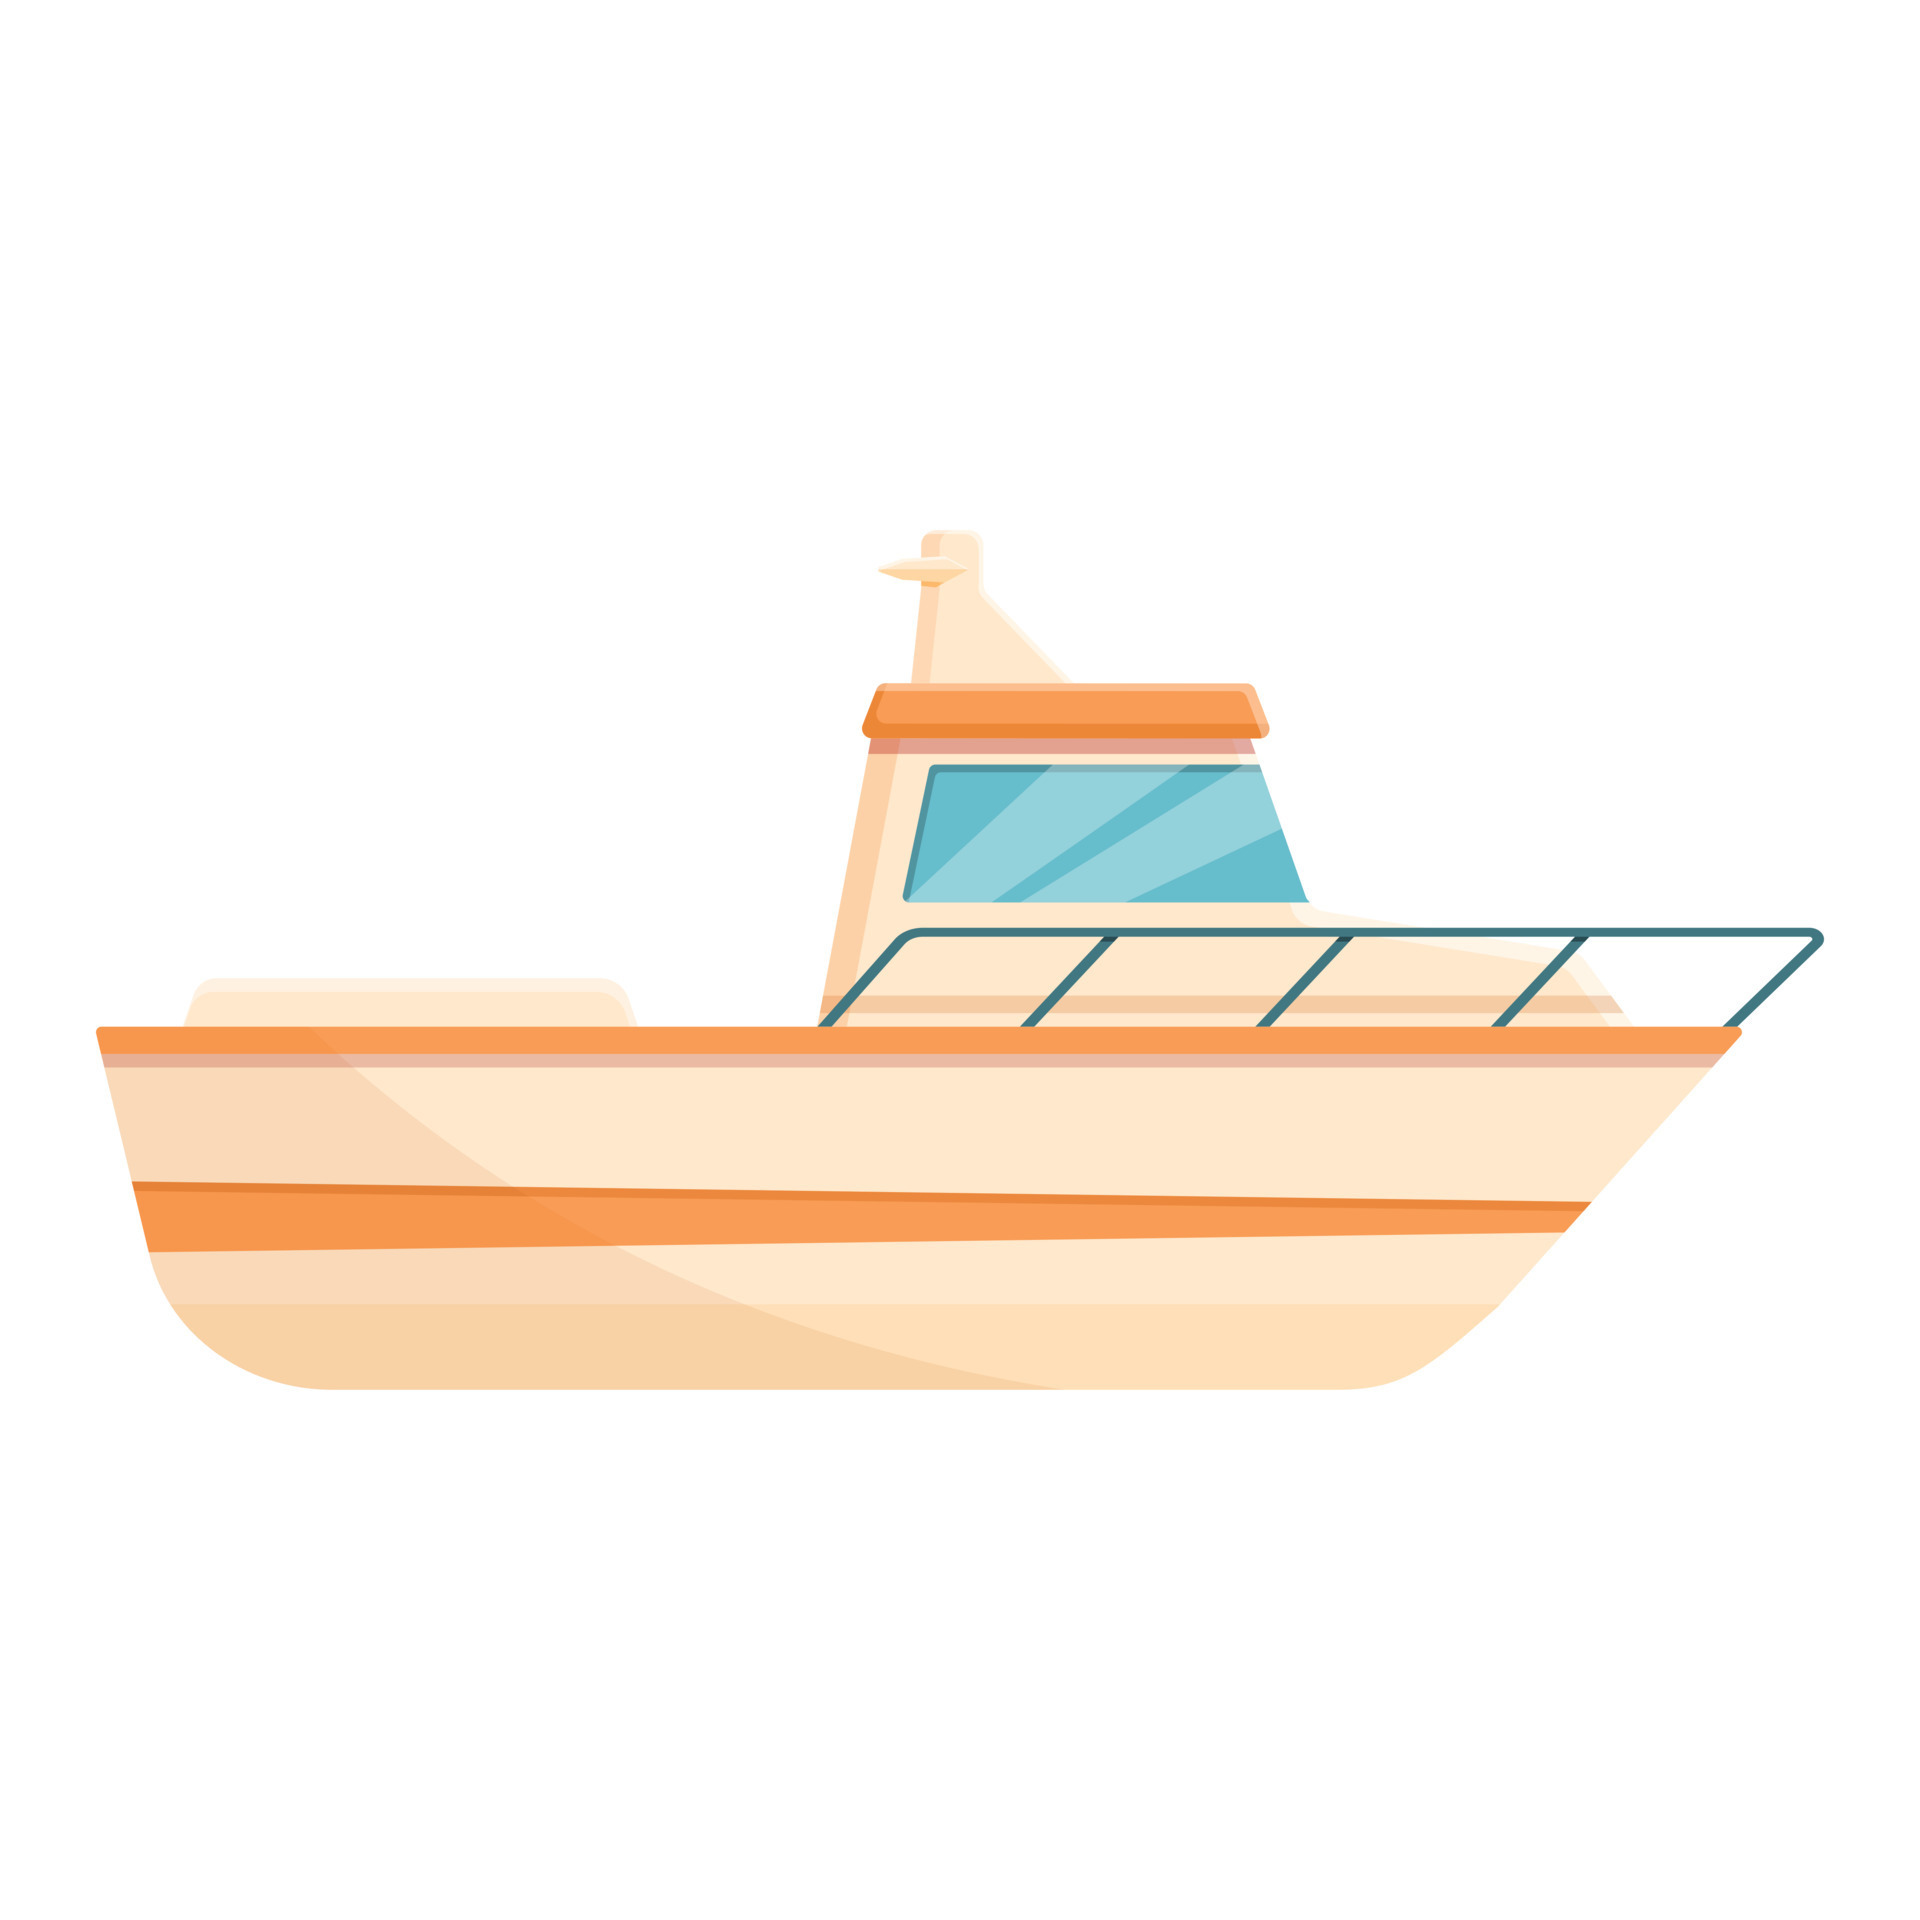 https://static.vecteezy.com/system/resources/previews/014/293/673/original/small-fishing-boat-icon-cartoon-style-vector.jpg